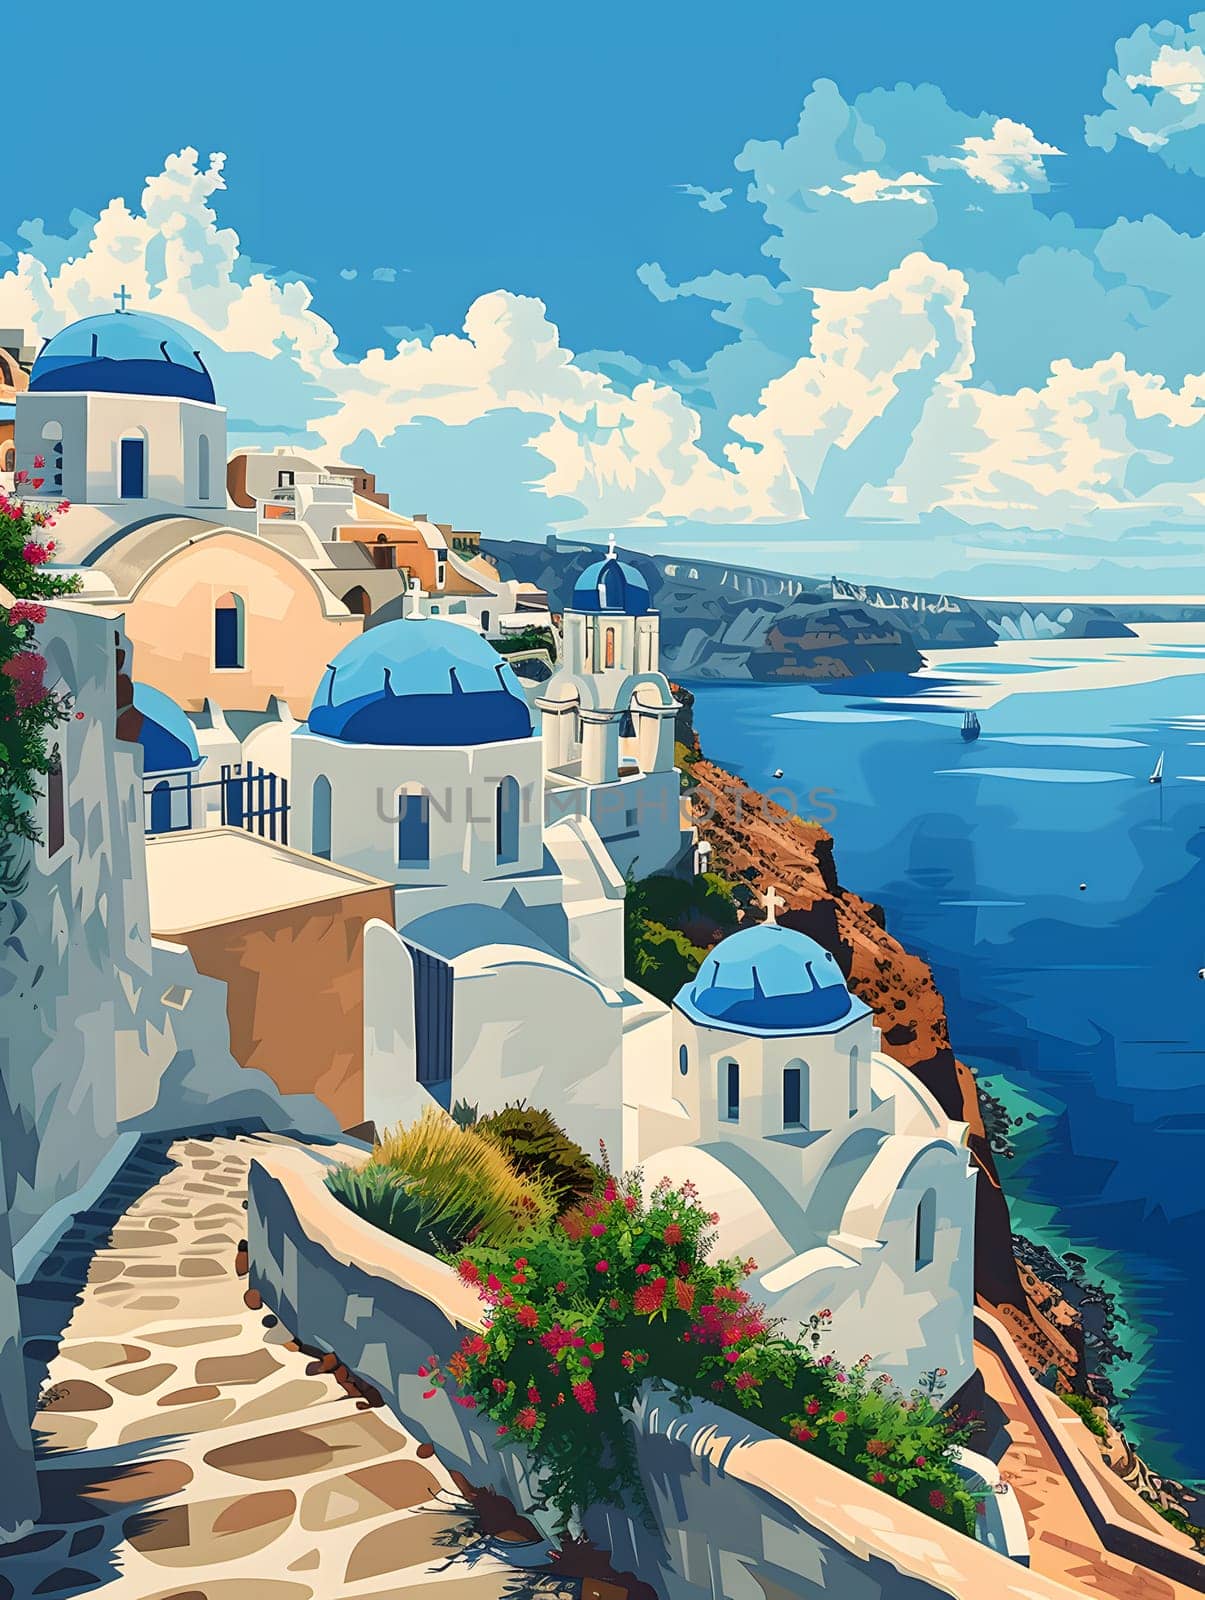 a painting of a city with blue domes overlooking the ocean by Nadtochiy